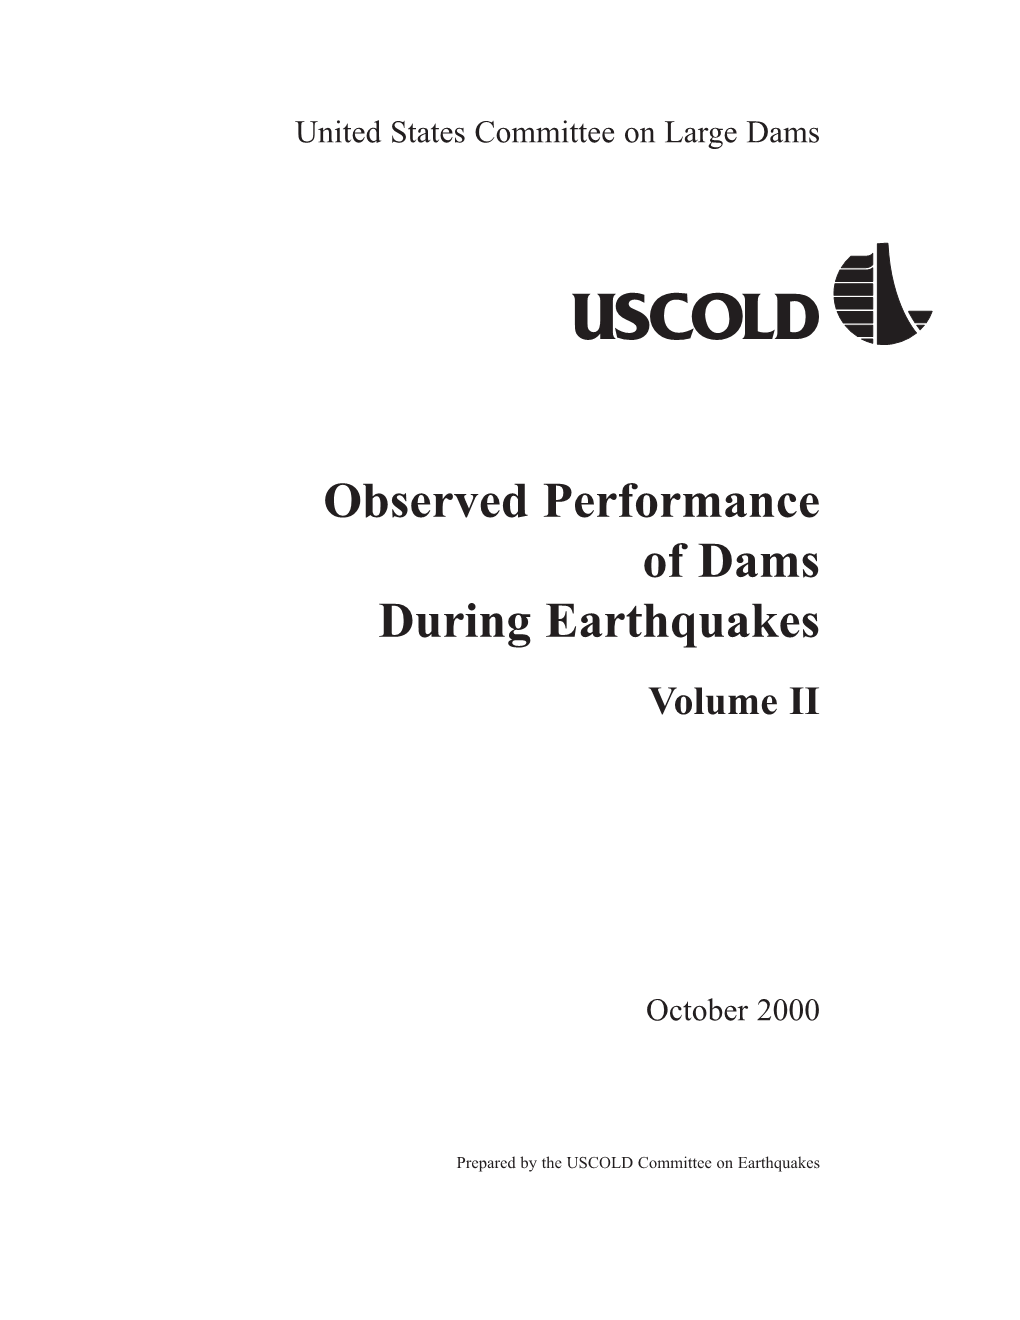 Observed Performance of Dams During Earthquakes Volume II